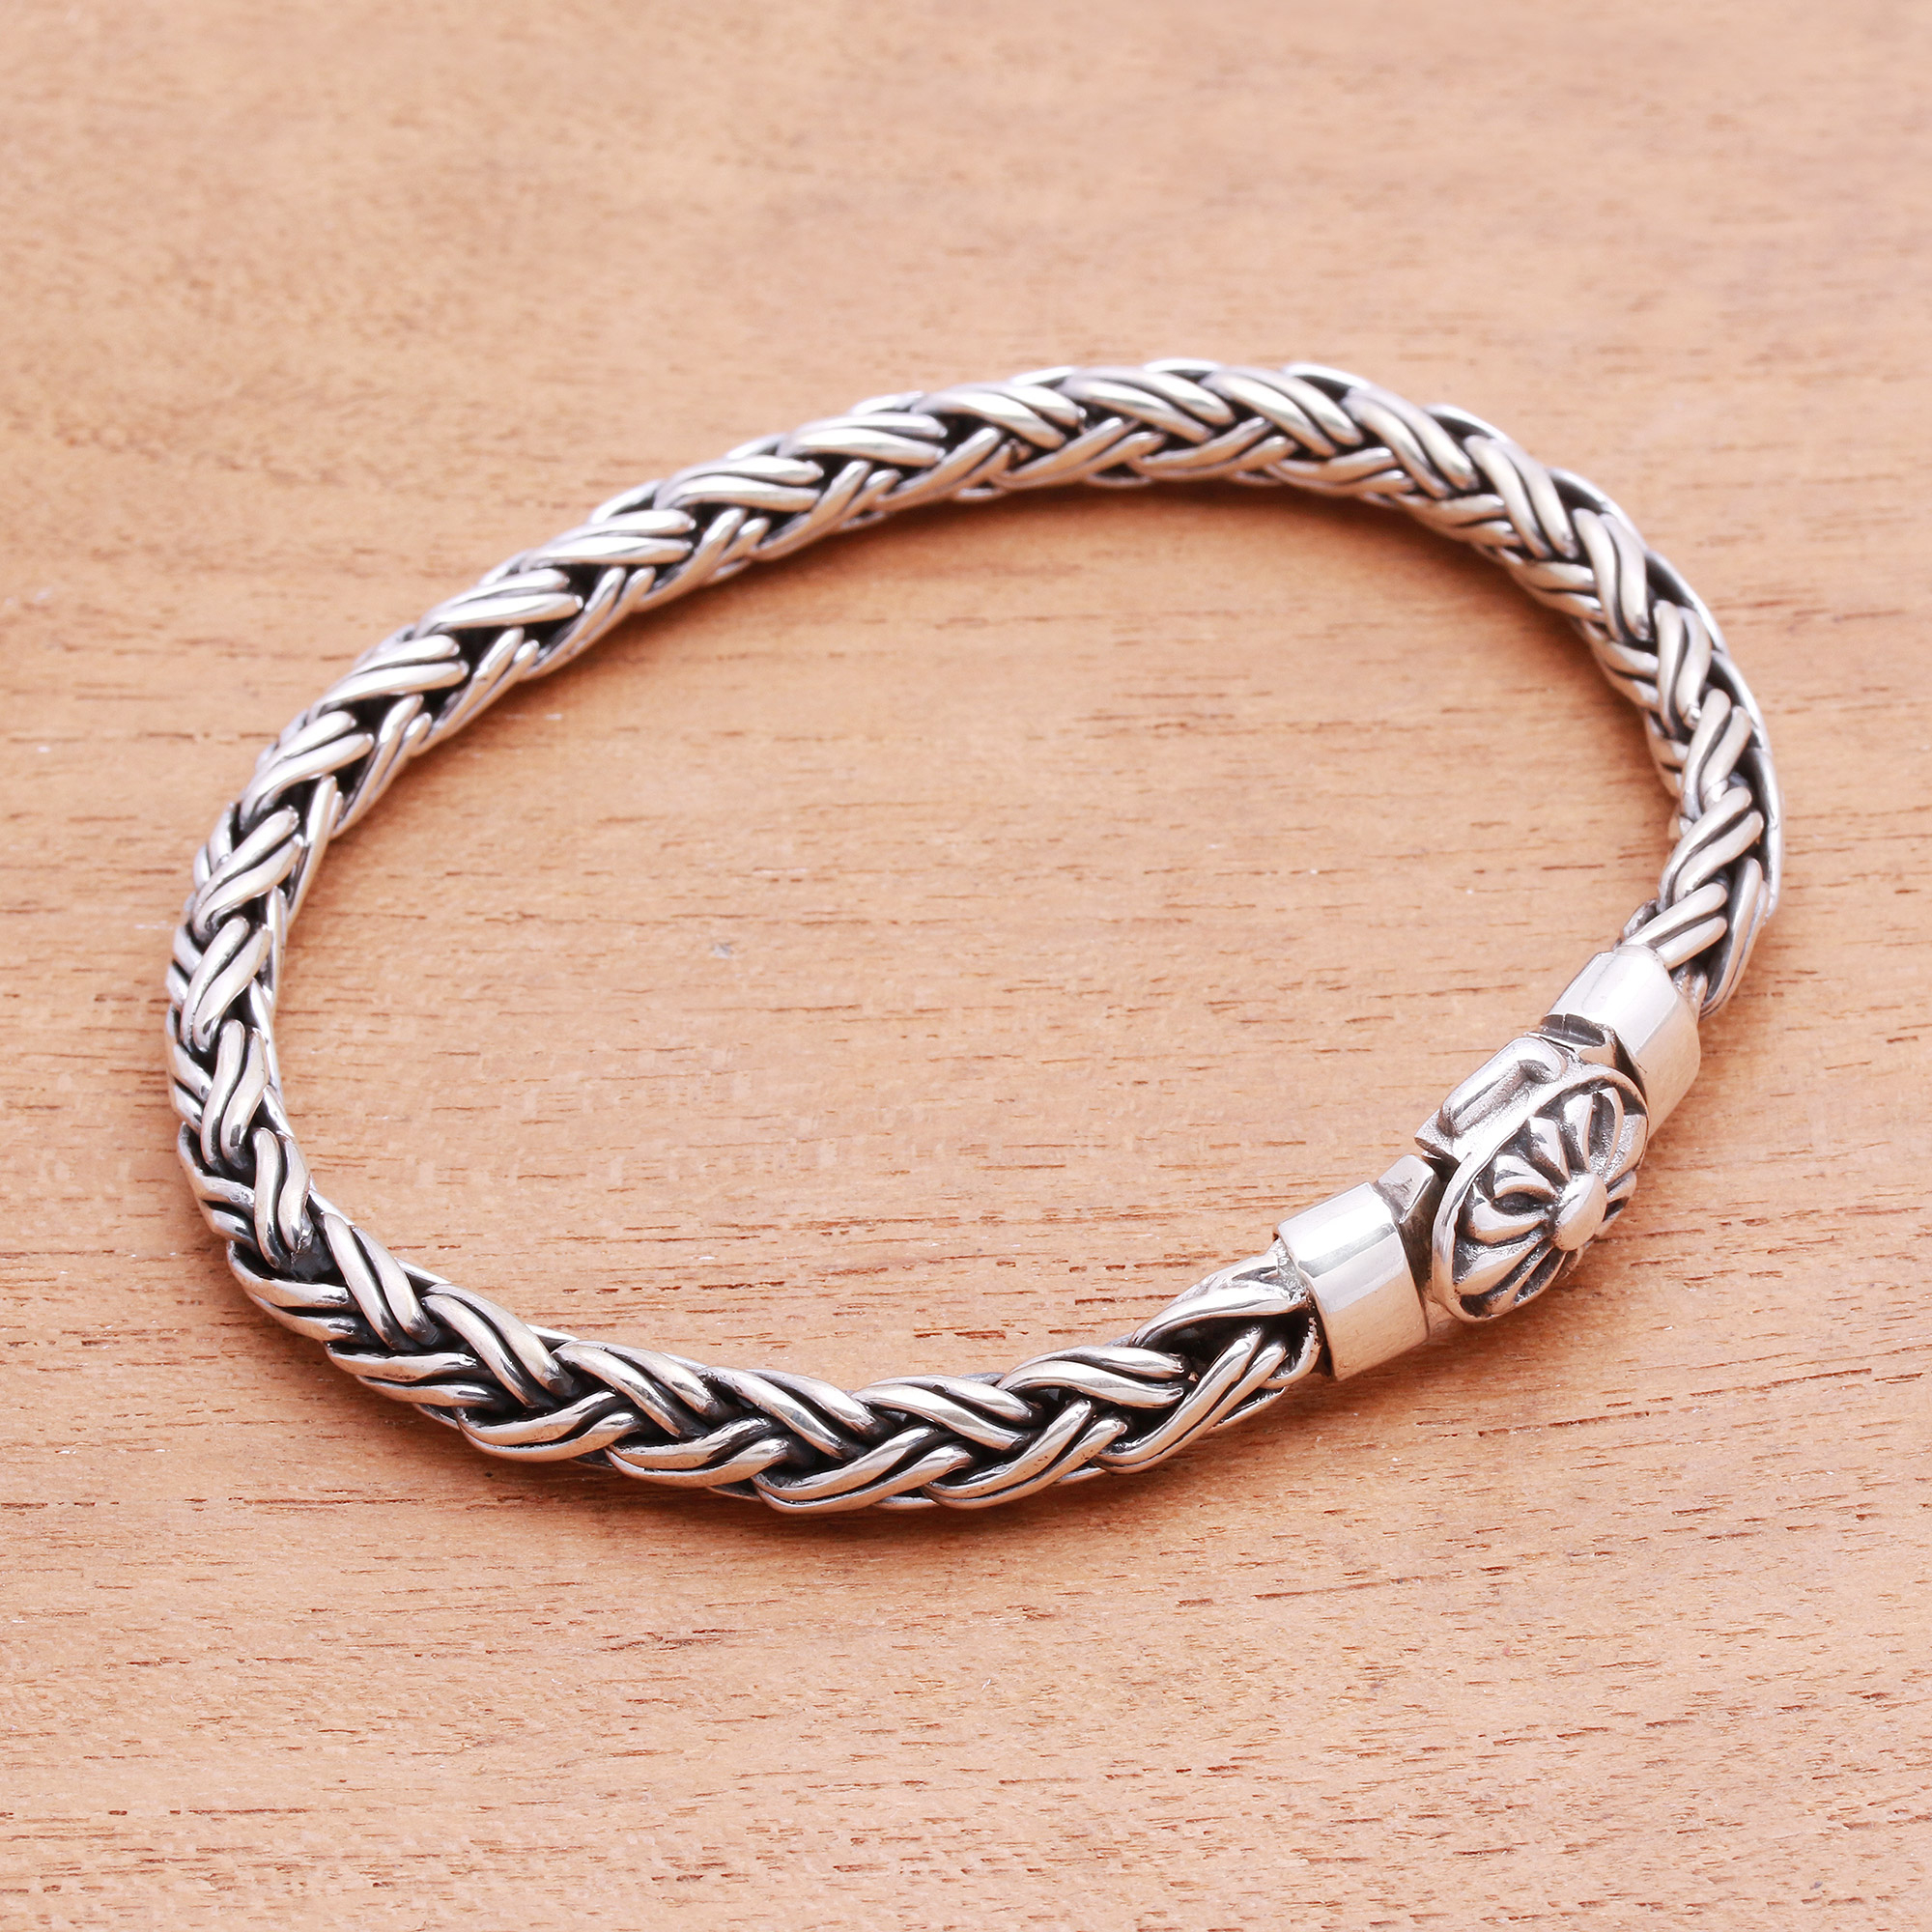 Sterling Silver Wheat Chain Bracelet from Bali - Charming Wheat | NOVICA